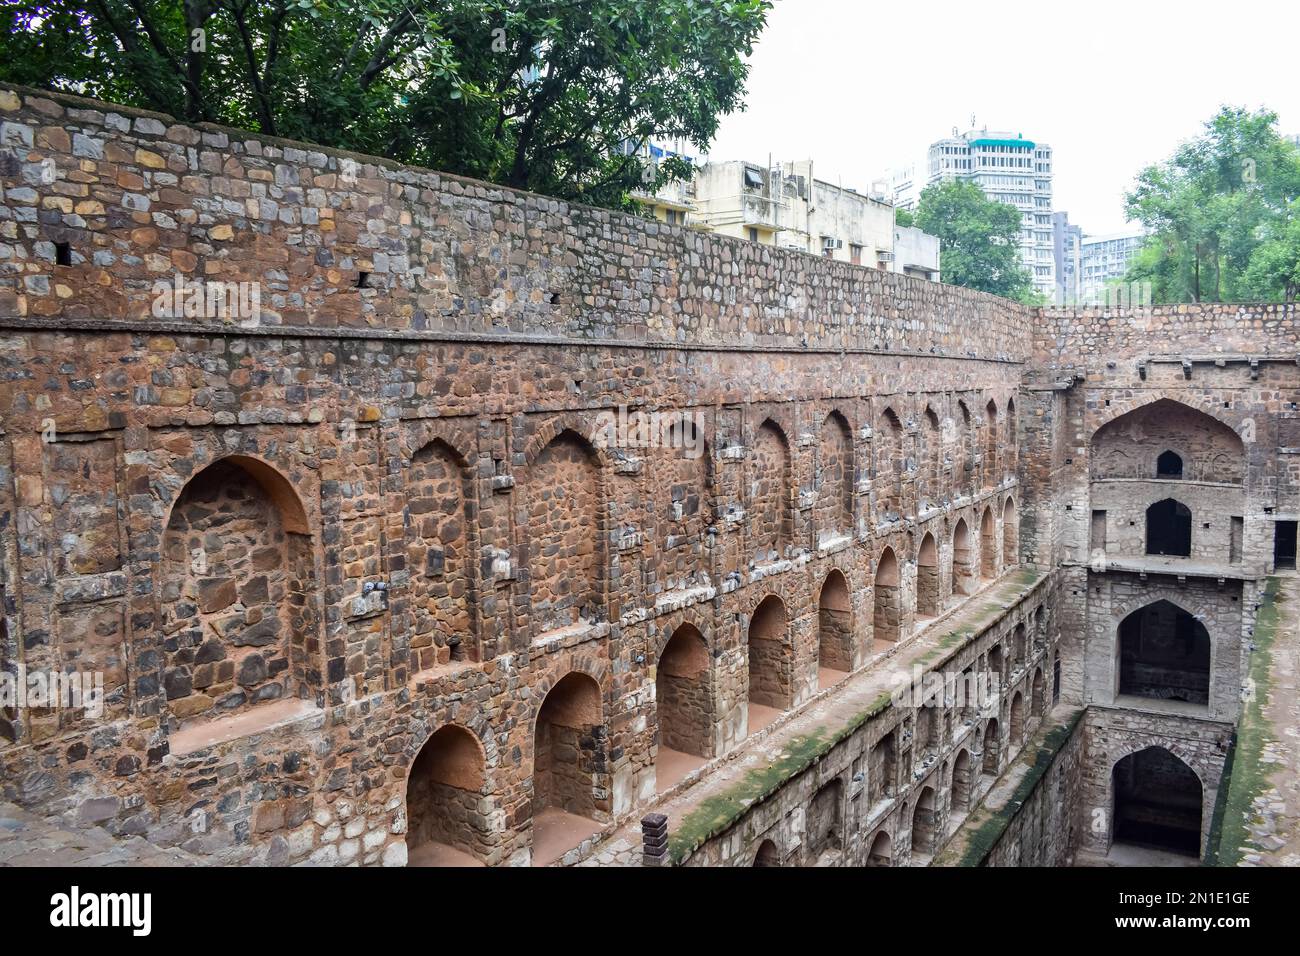 Agrasen Ki Baoli (Step Well) situated in the middle of Connaught placed New Delhi India, Old Ancient archaeology Construction Stock Photo